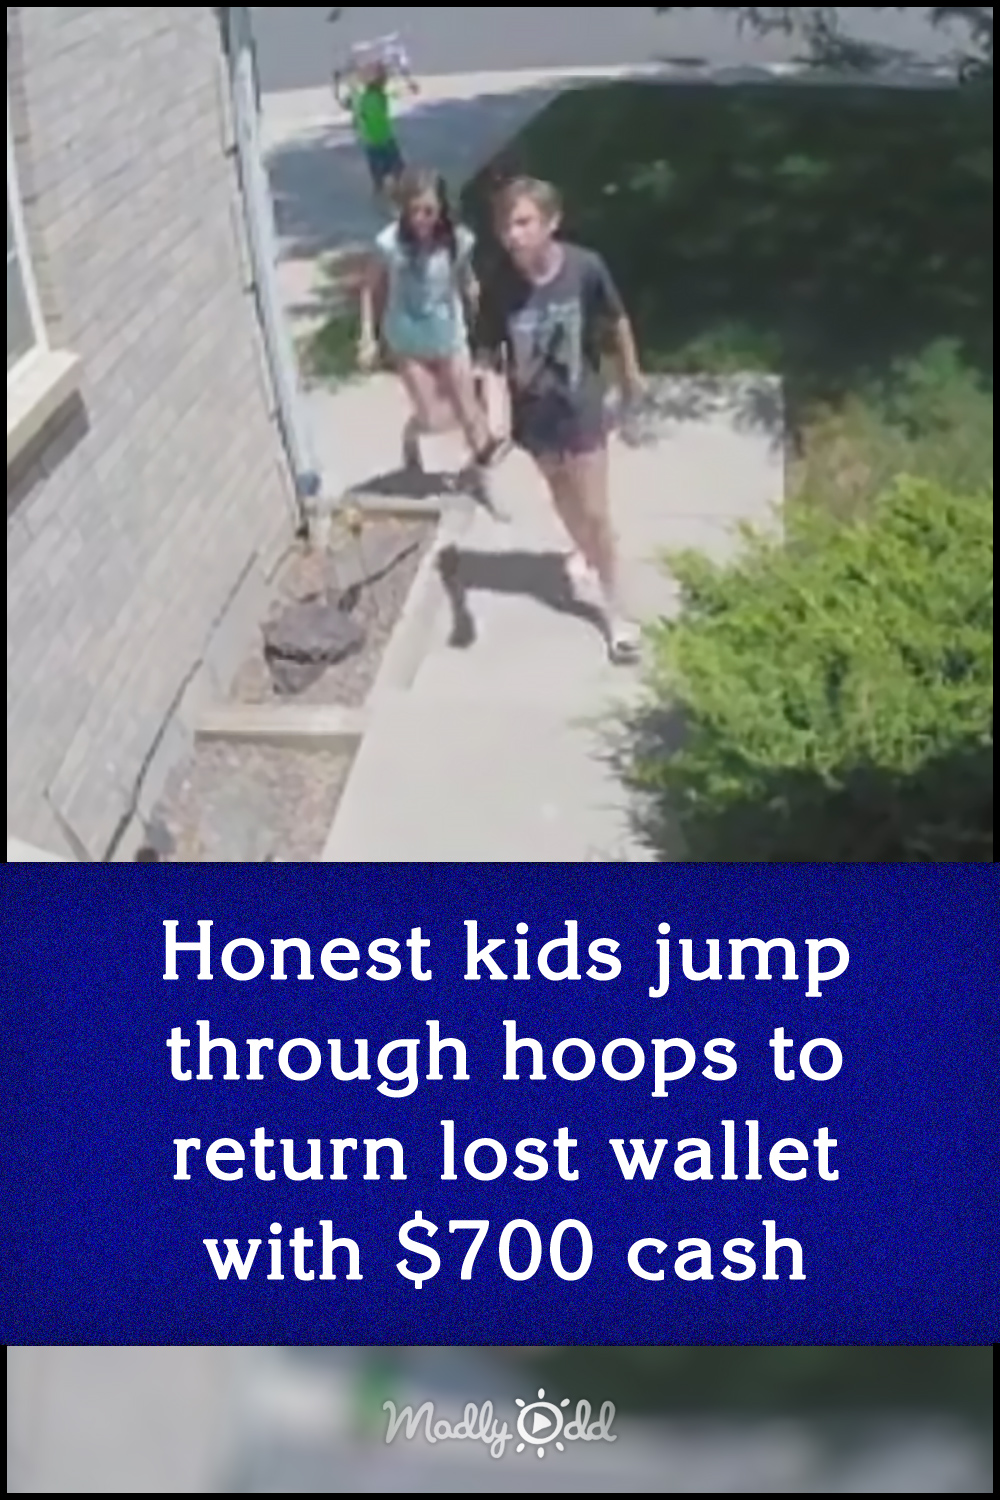 Honest kids jump through hoops to return lost wallet with $700 cash